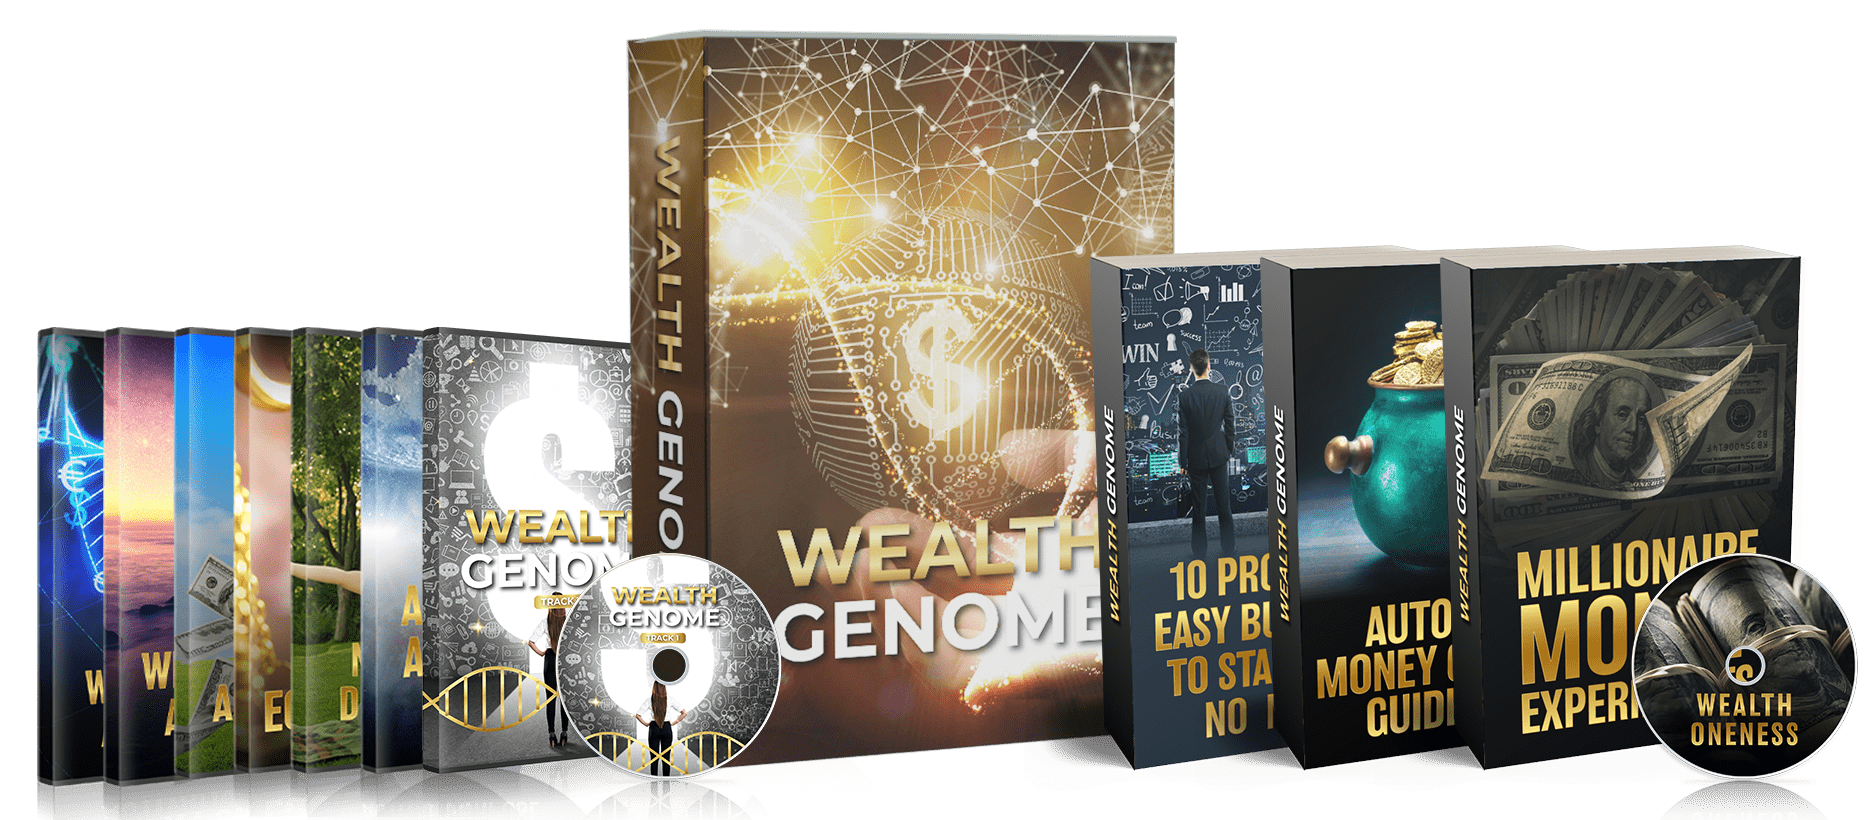 The Wealth Genome Reviews